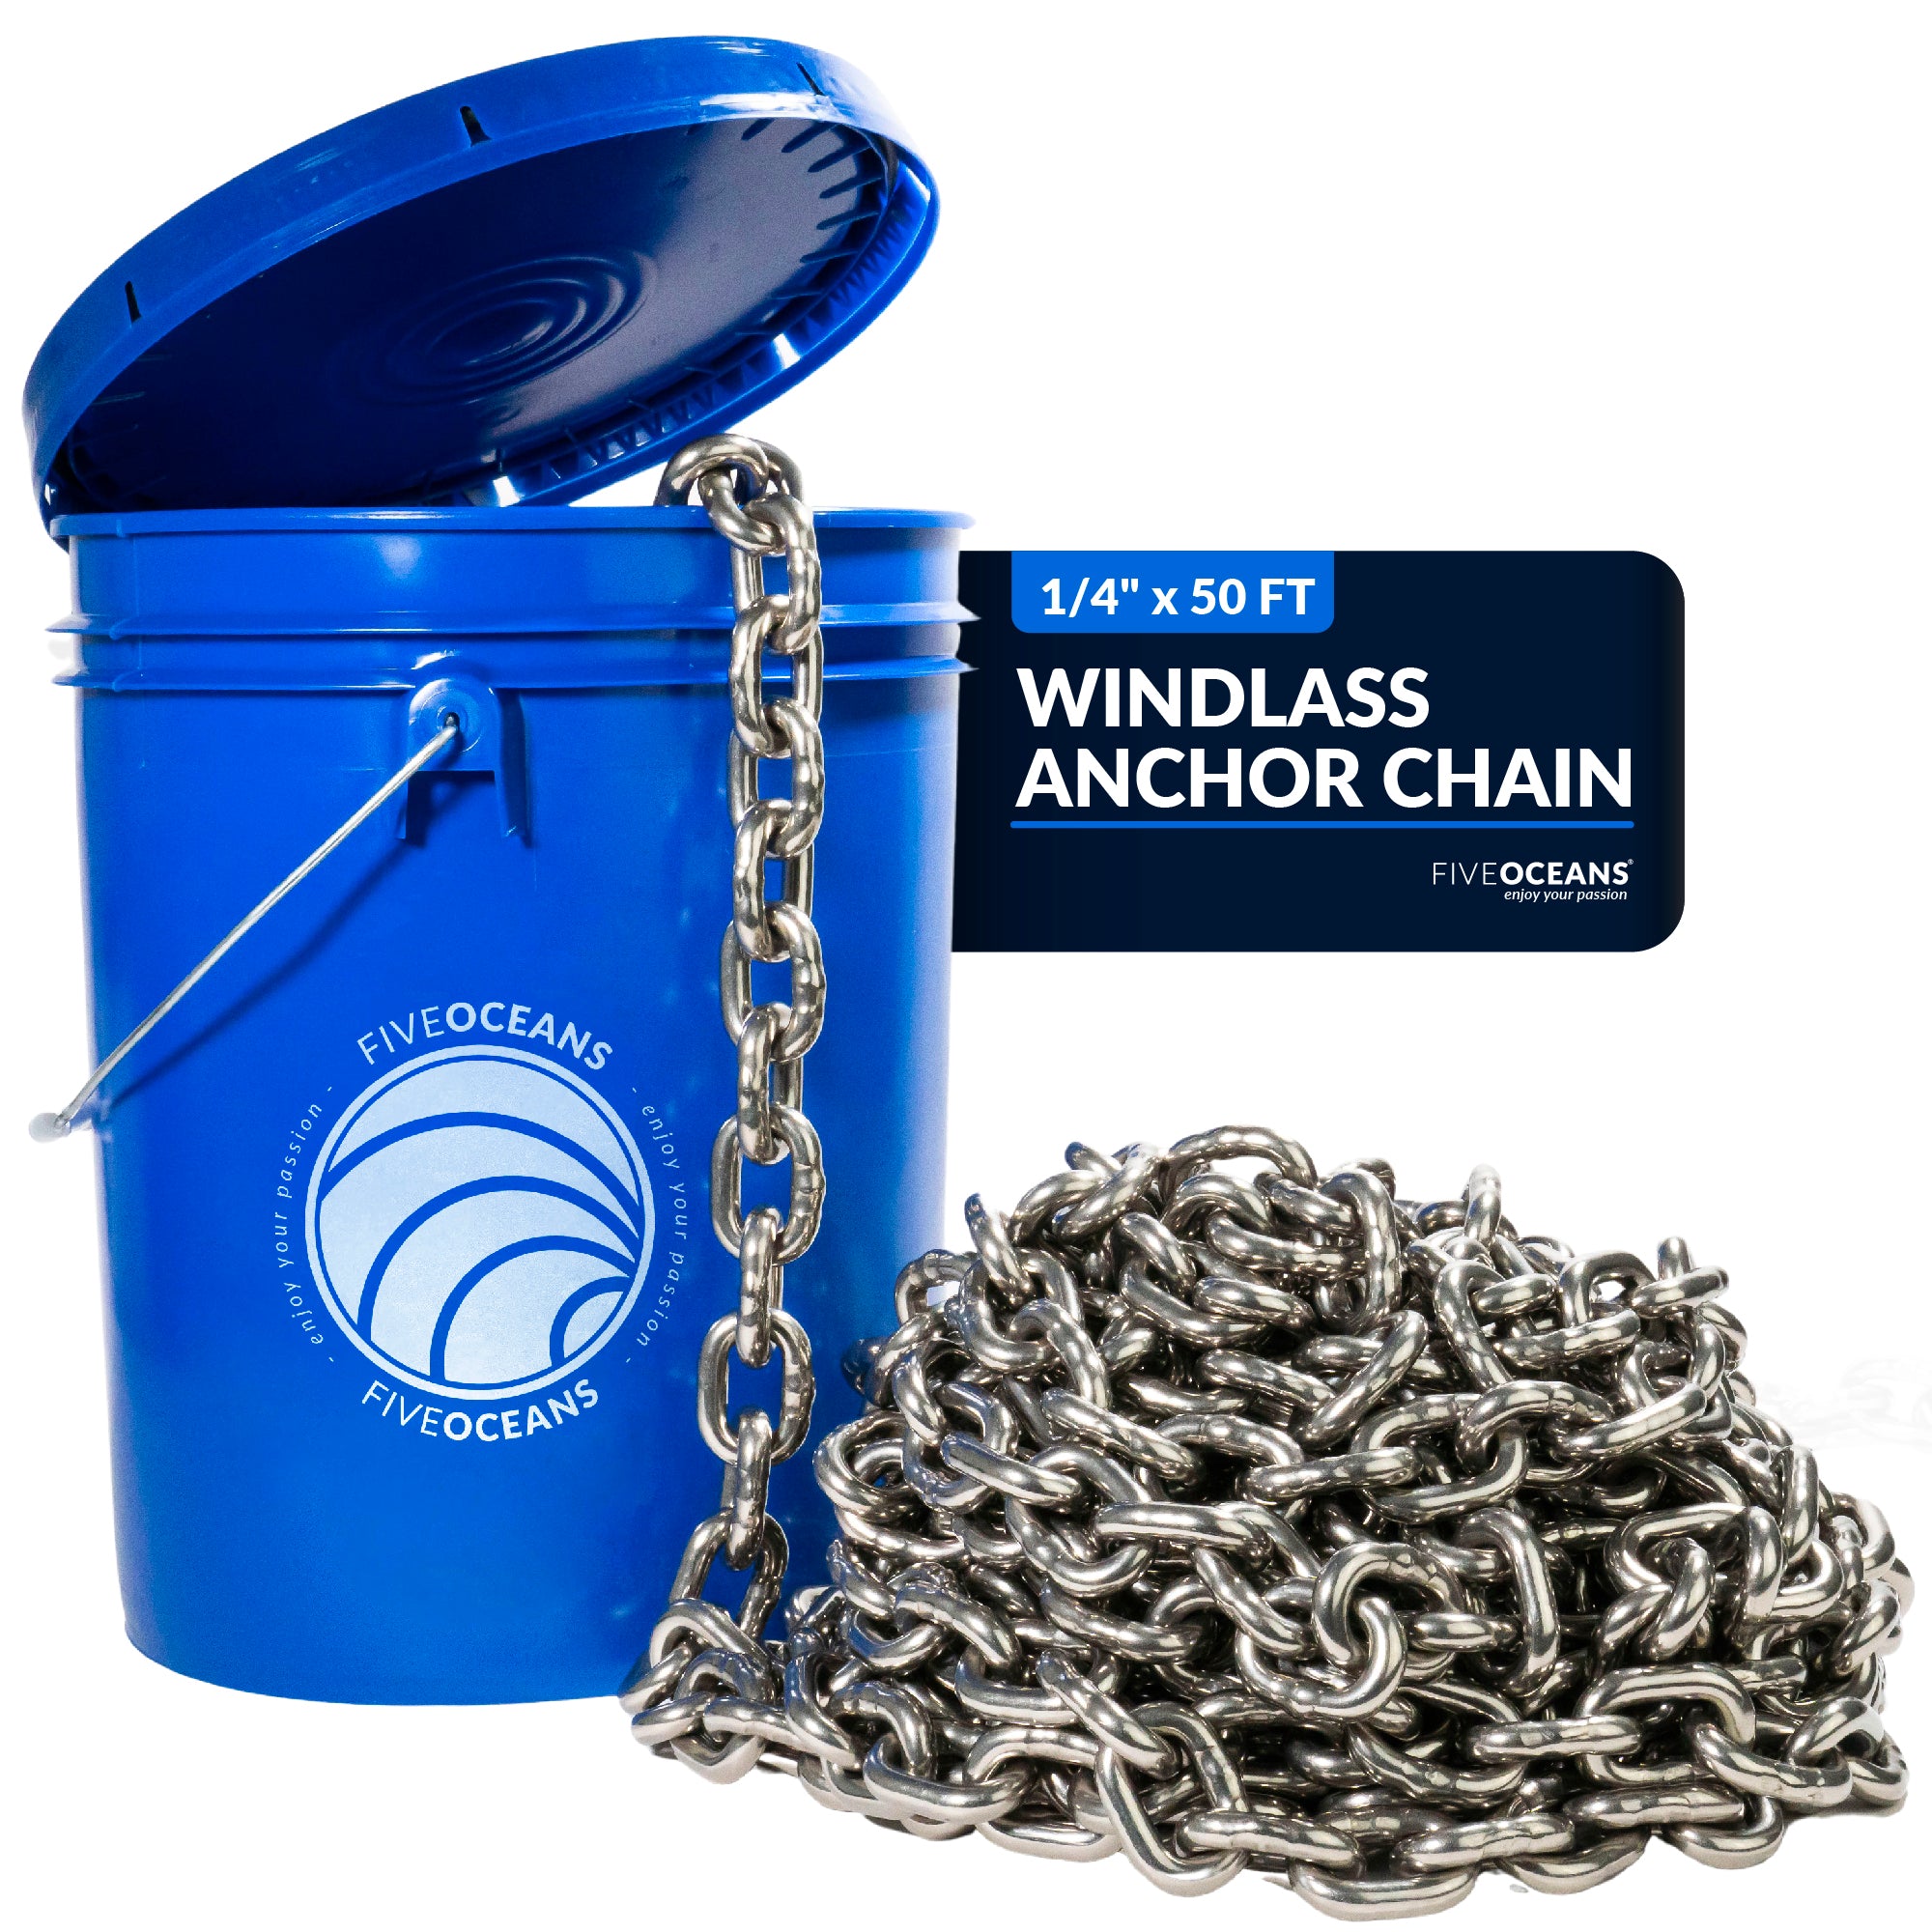 1/4" x 50' Boat Windlass Anchor Chain HT G4 Stainless Steel - FO4492-M50